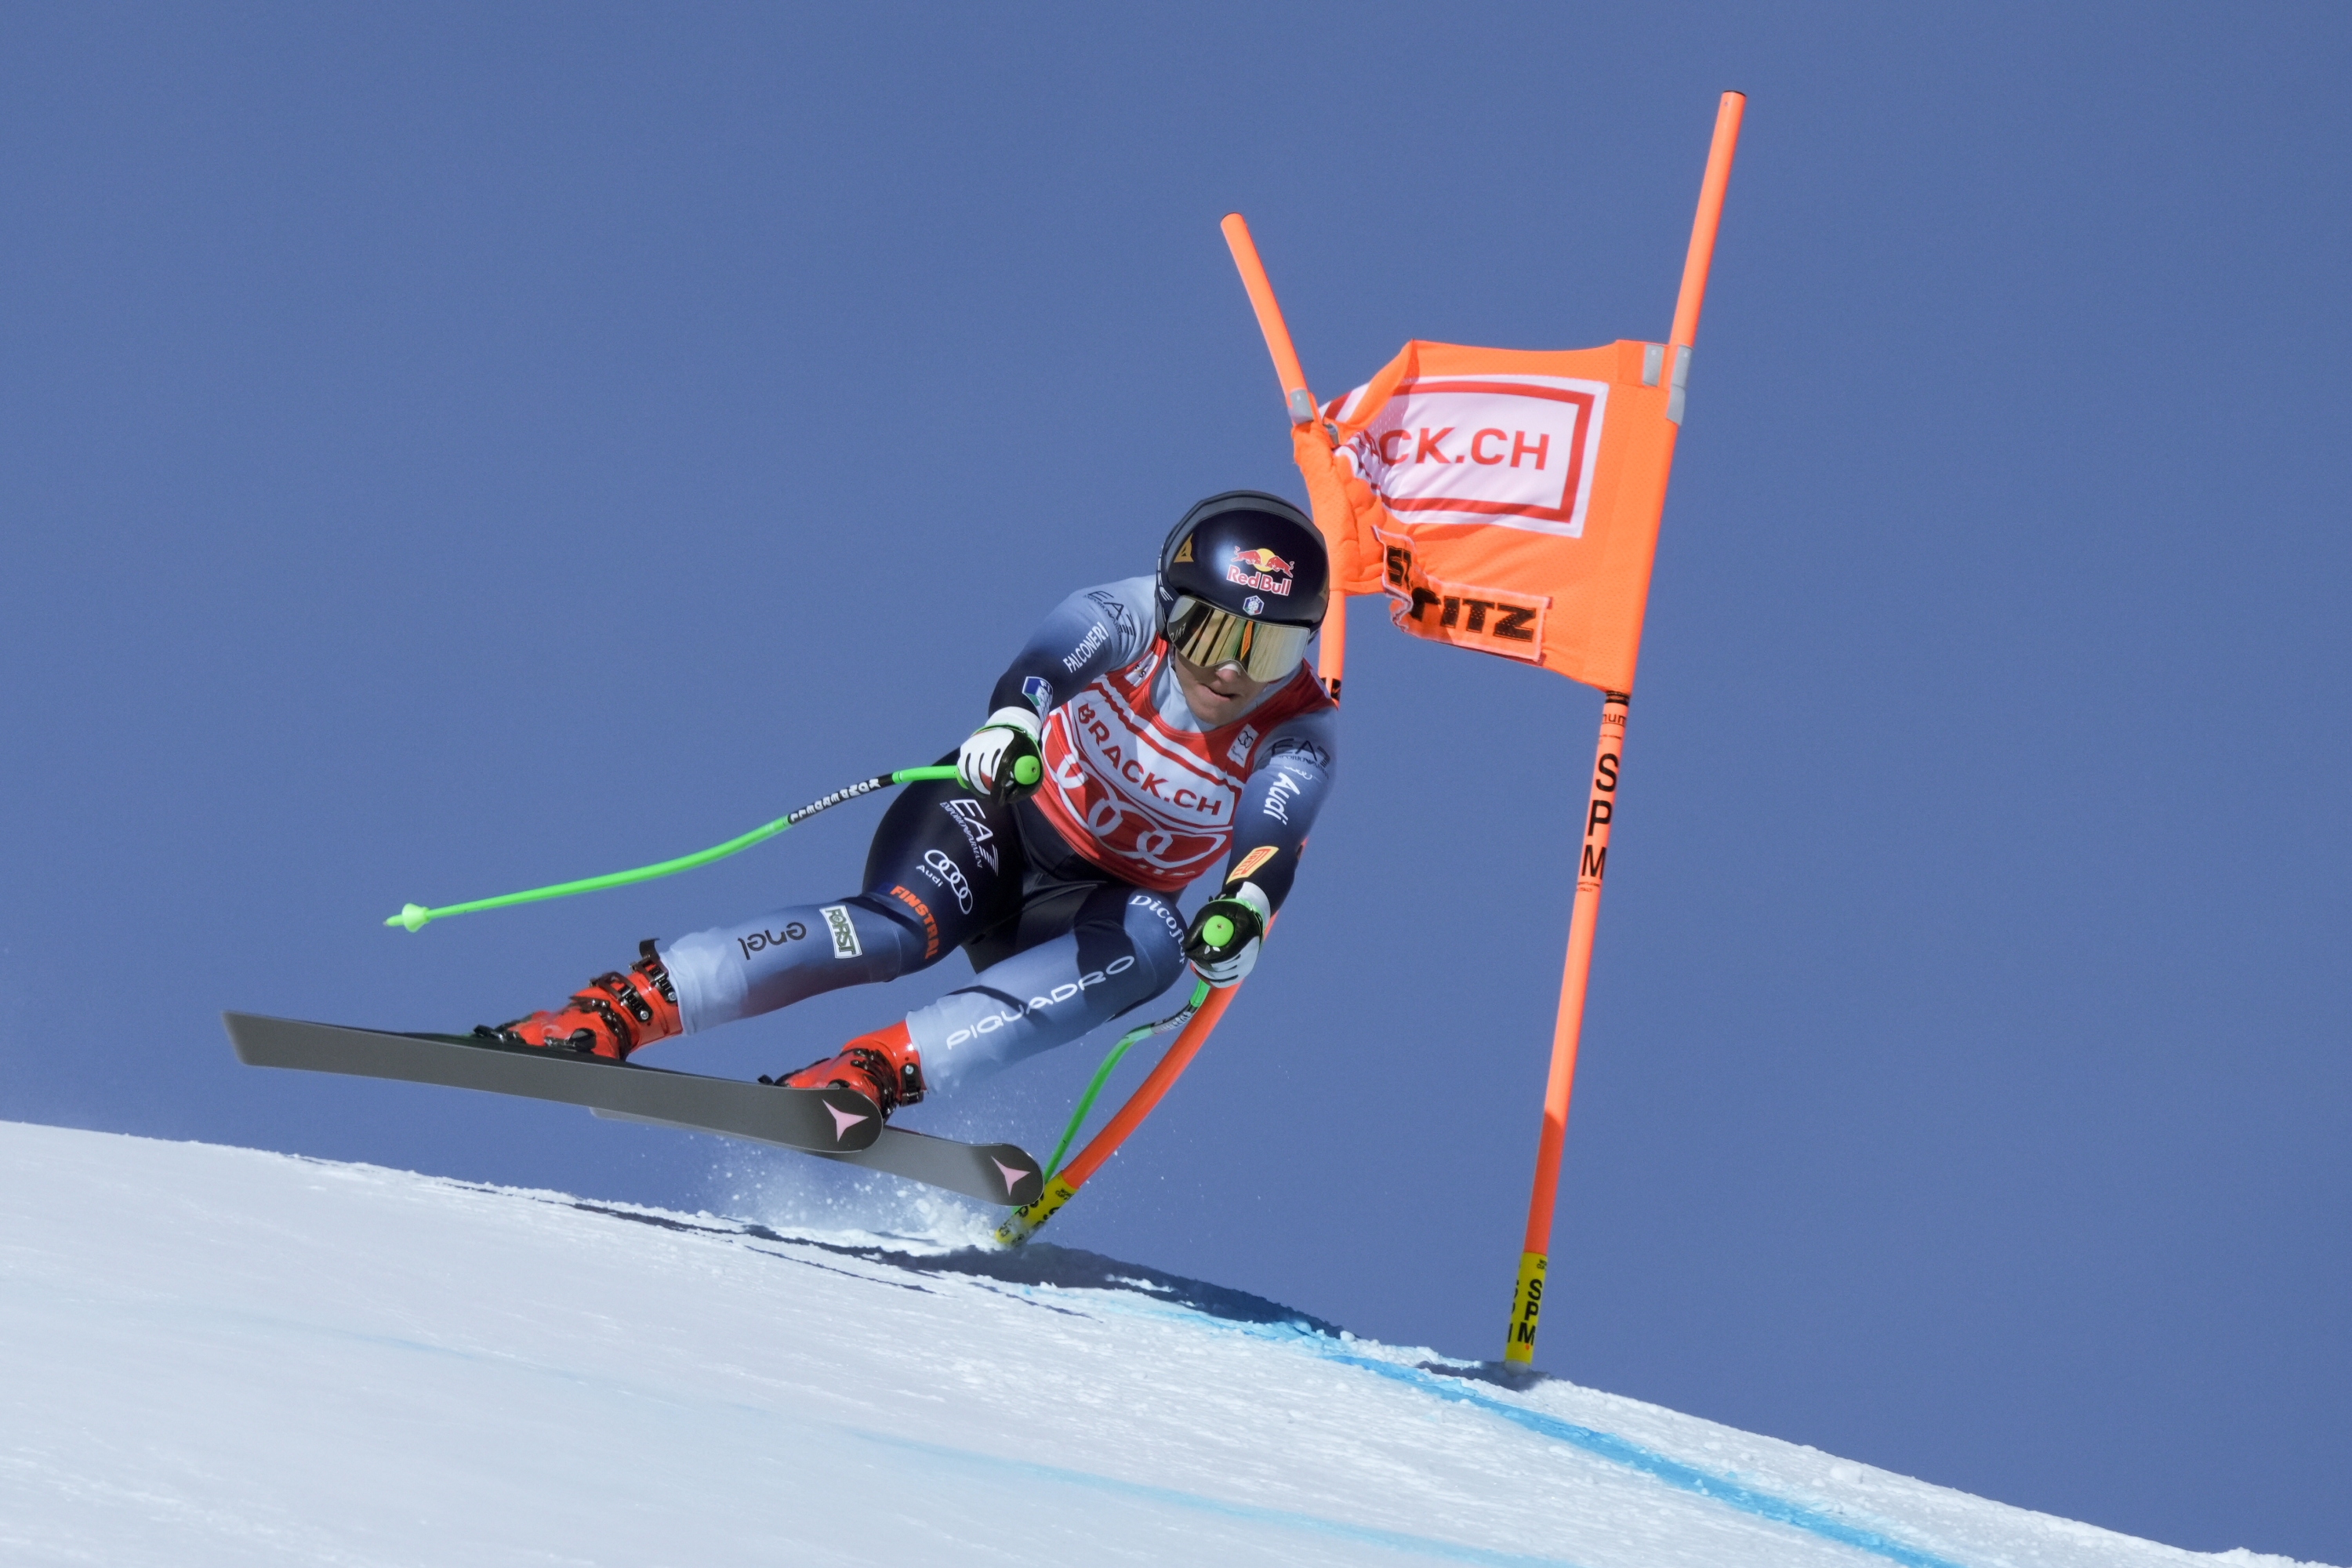 ST MORITZ, SWITZERLAND - DECEMBER 9: Sofia Goggia of Team Italy in action during the Audi FIS Alpine Ski World Cup Women's Downhill on December 9, 2023 in St Moritz, Switzerland. (Photo by Paul Brechu/Agence Zoom/Getty Images)